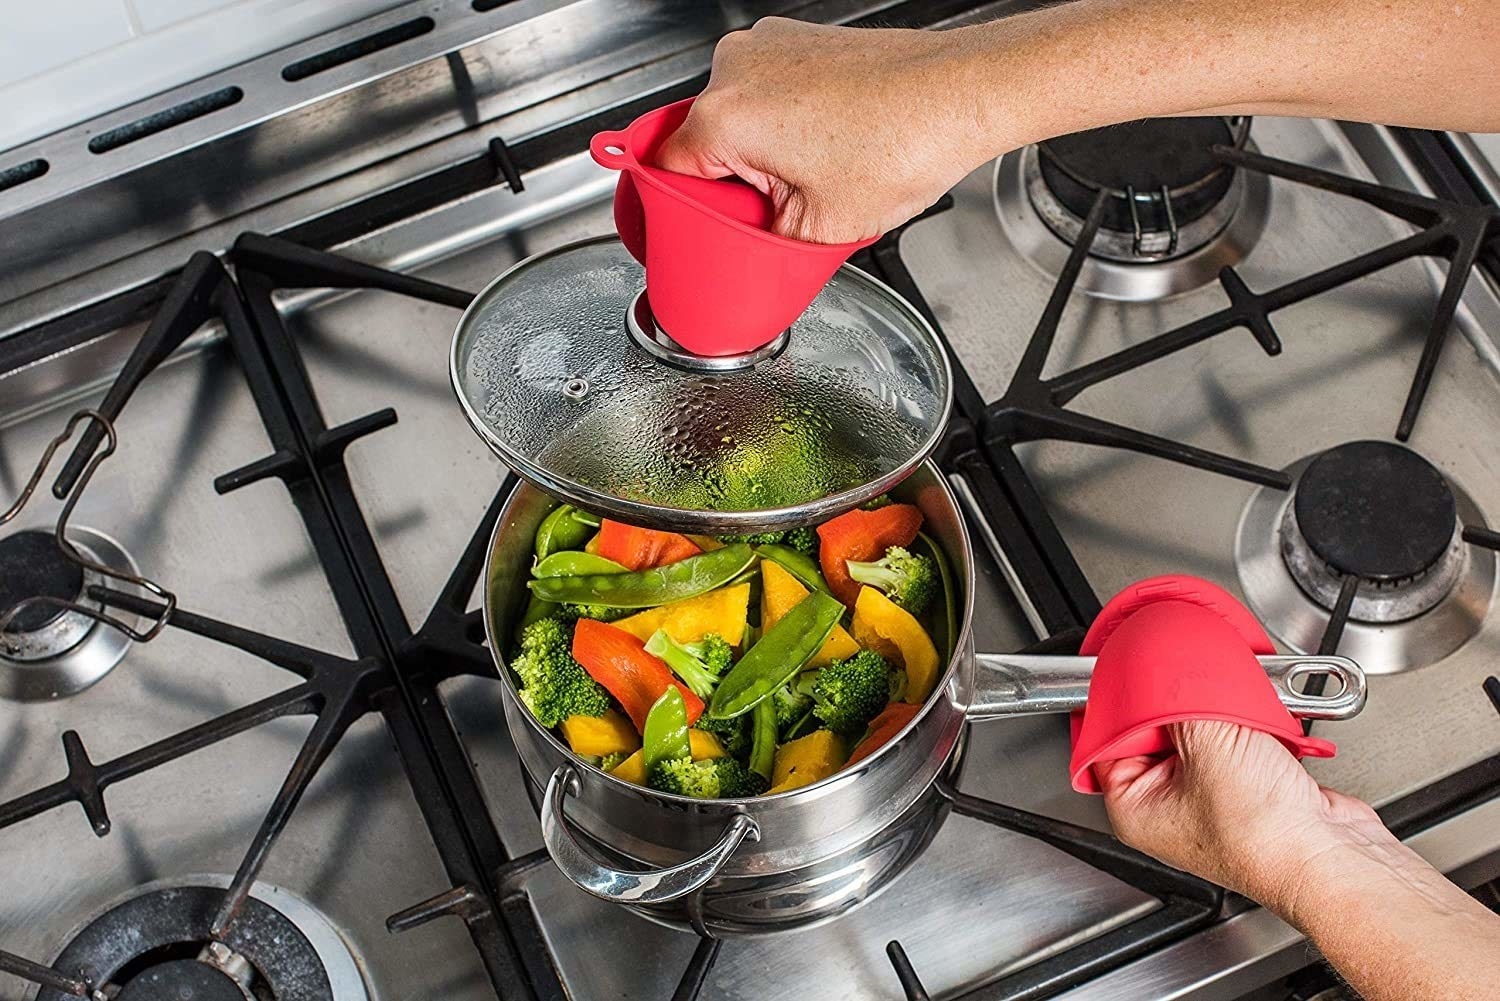 A person using silicone mitts to open the lid of a pot on a stove.